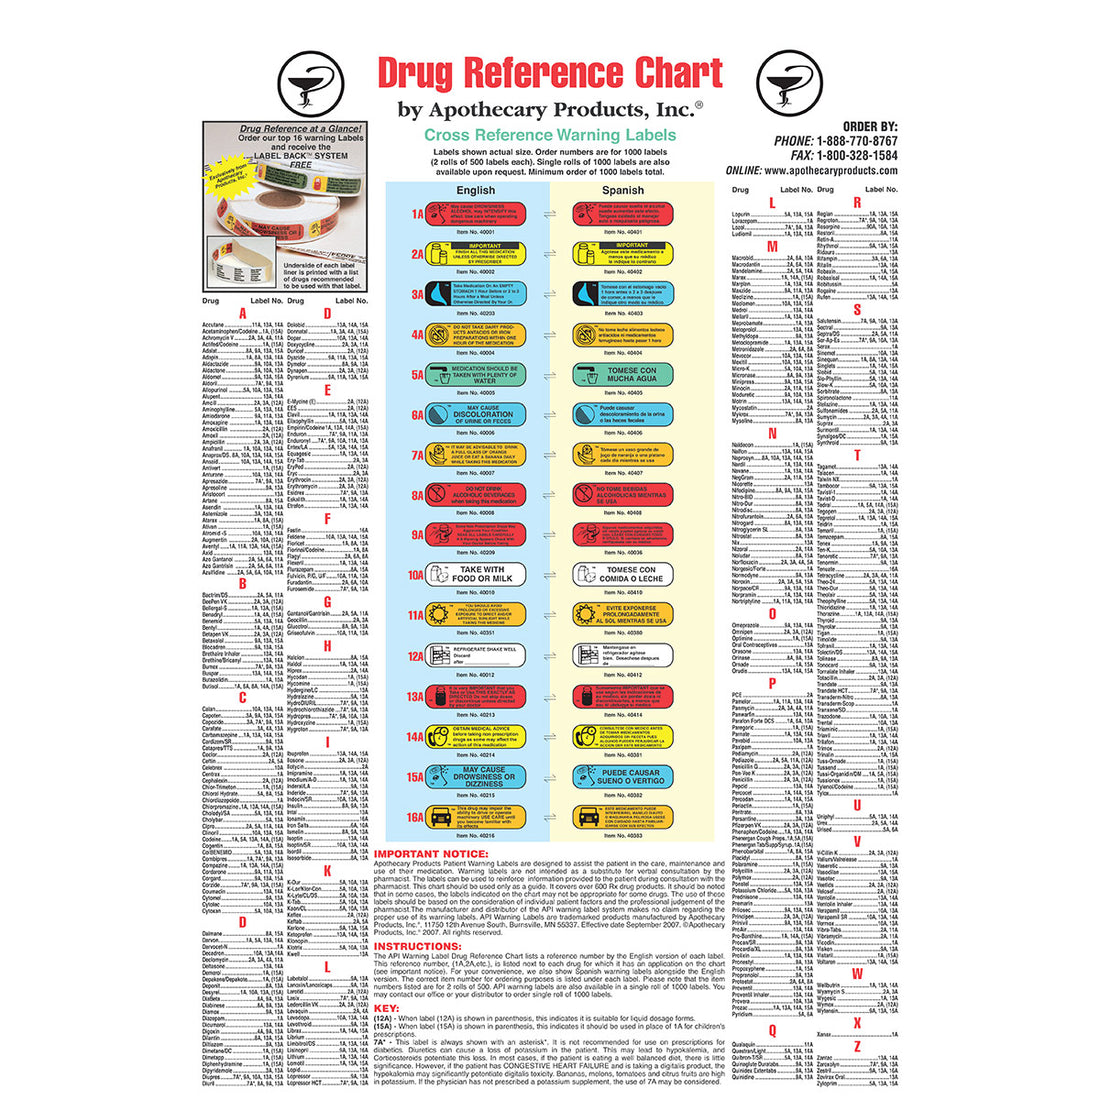 Patient Warning Label Drug Reference Chart